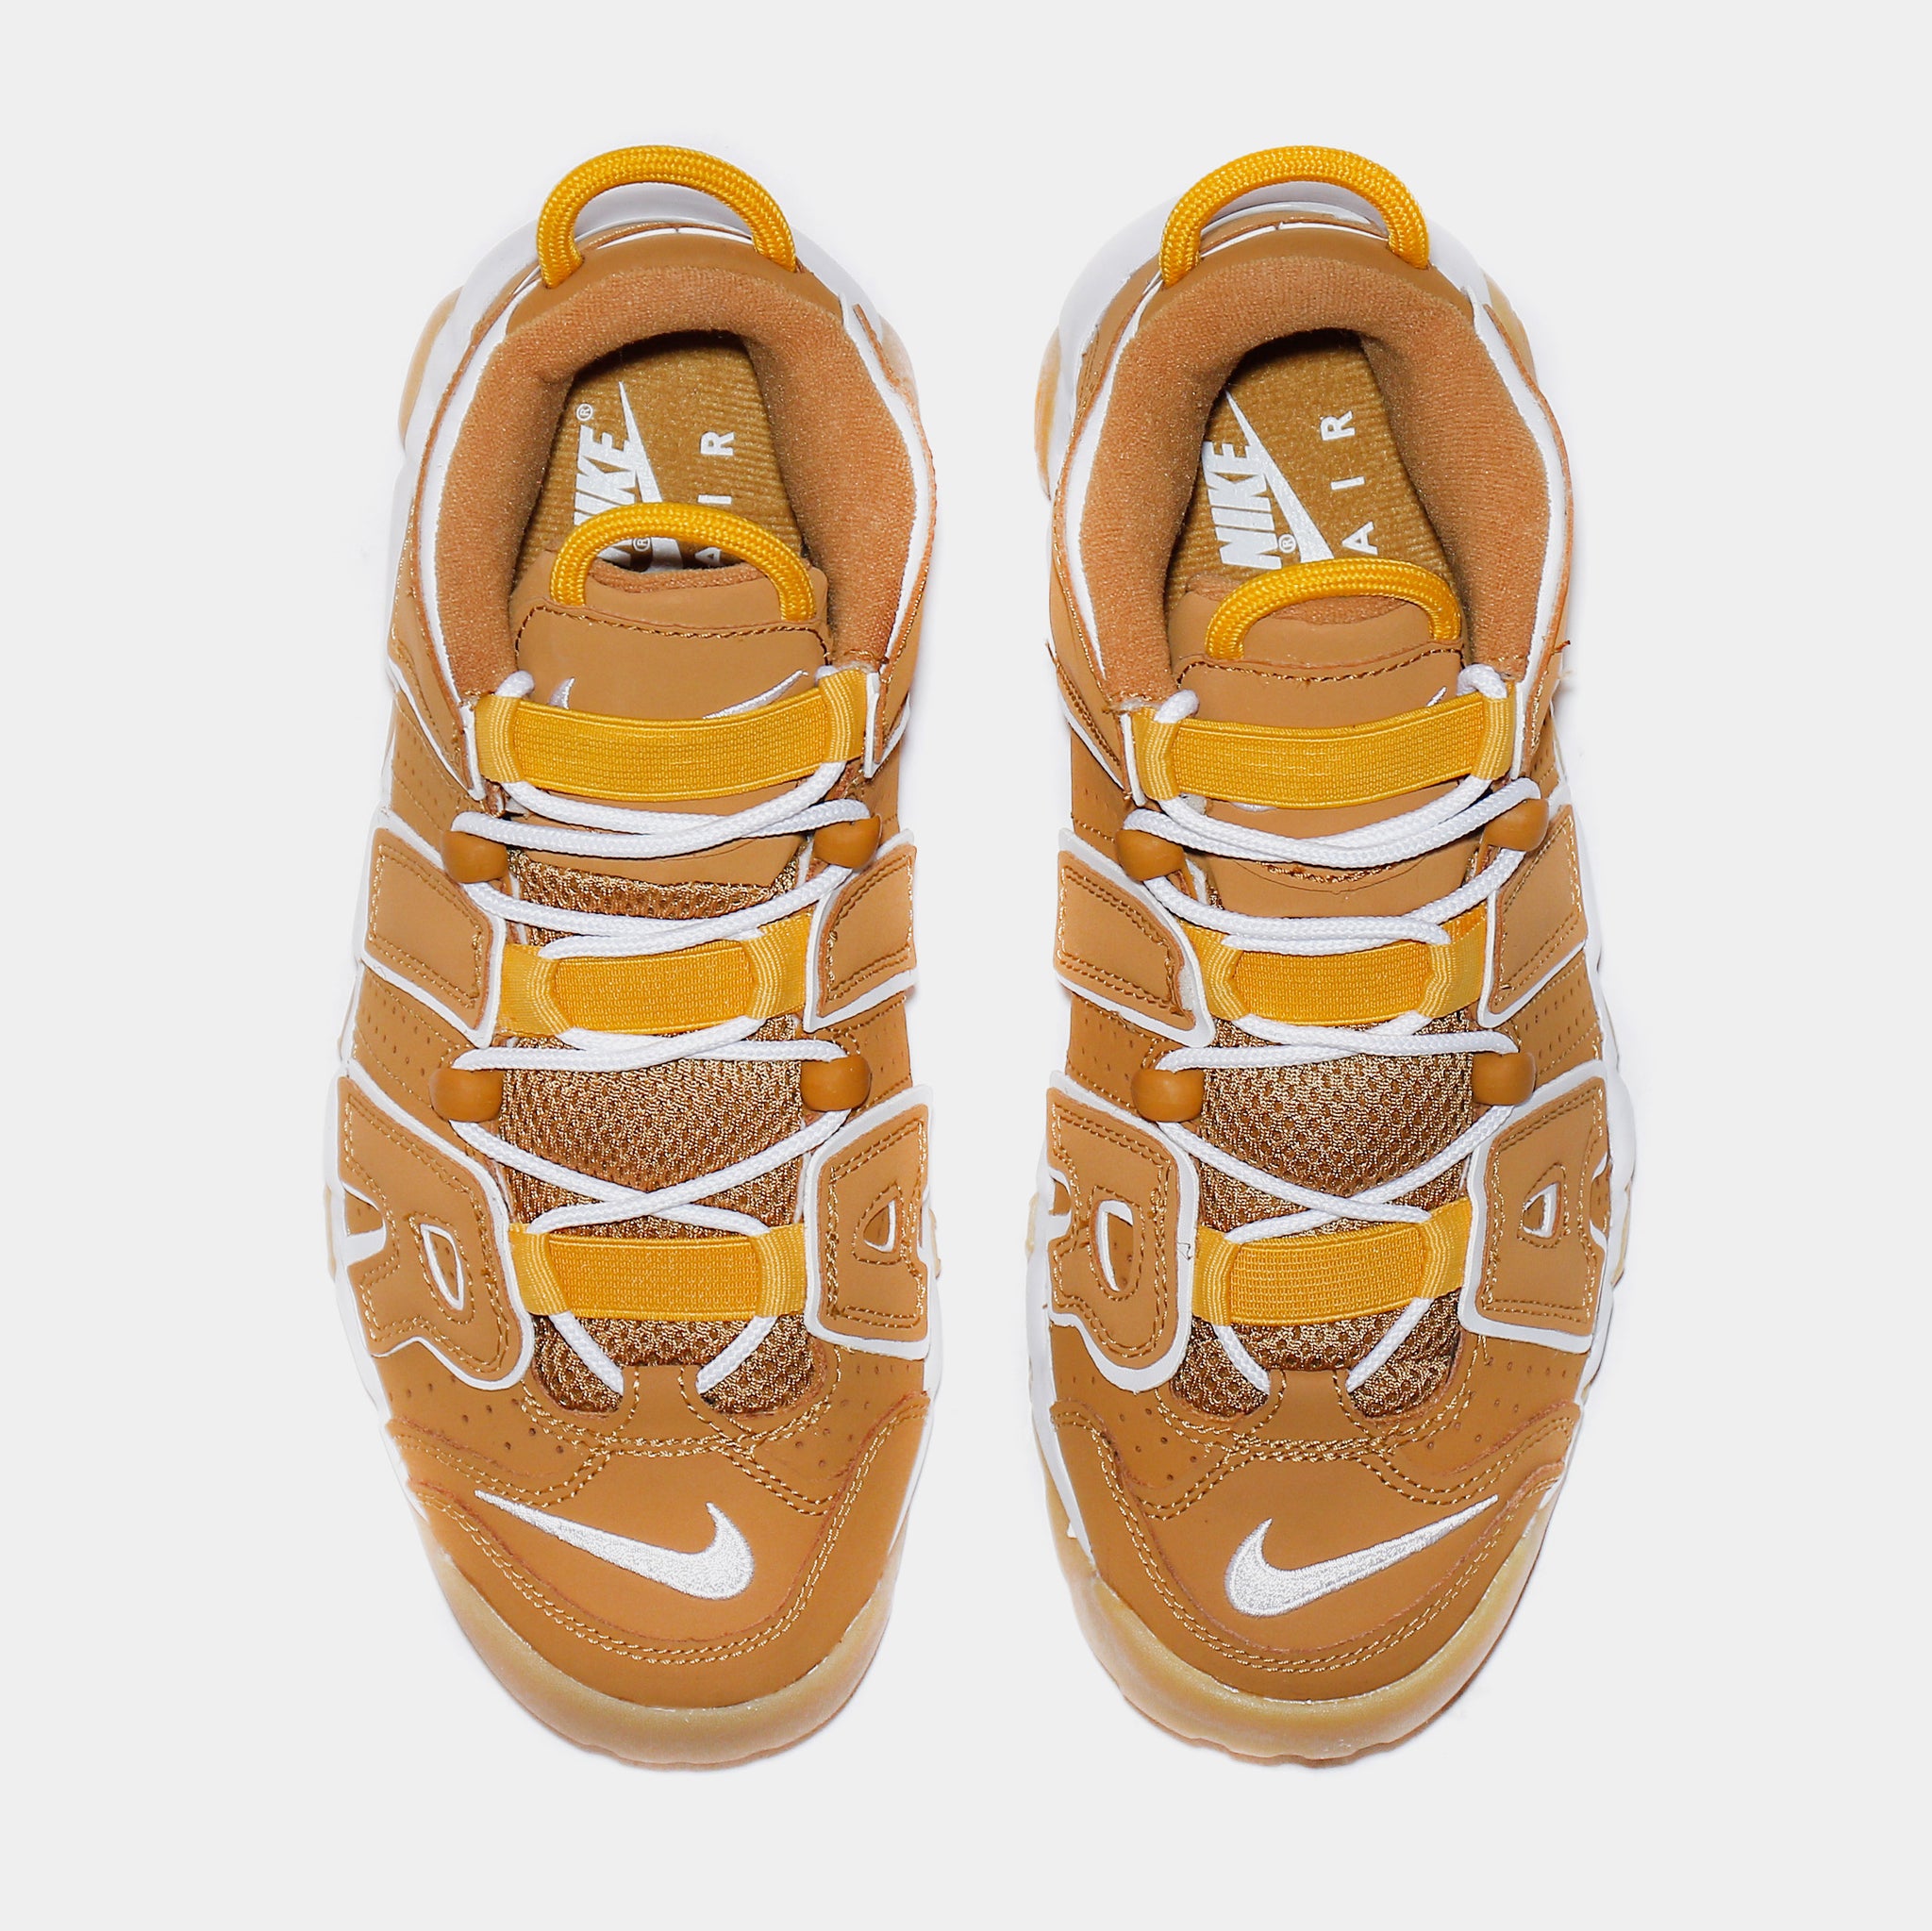 Nike Air More Uptempo Wheat Grade School Lifestyle Shoes Wheat White Pollen  Gum Light Brown DQ4713-700 – Shoe Palace